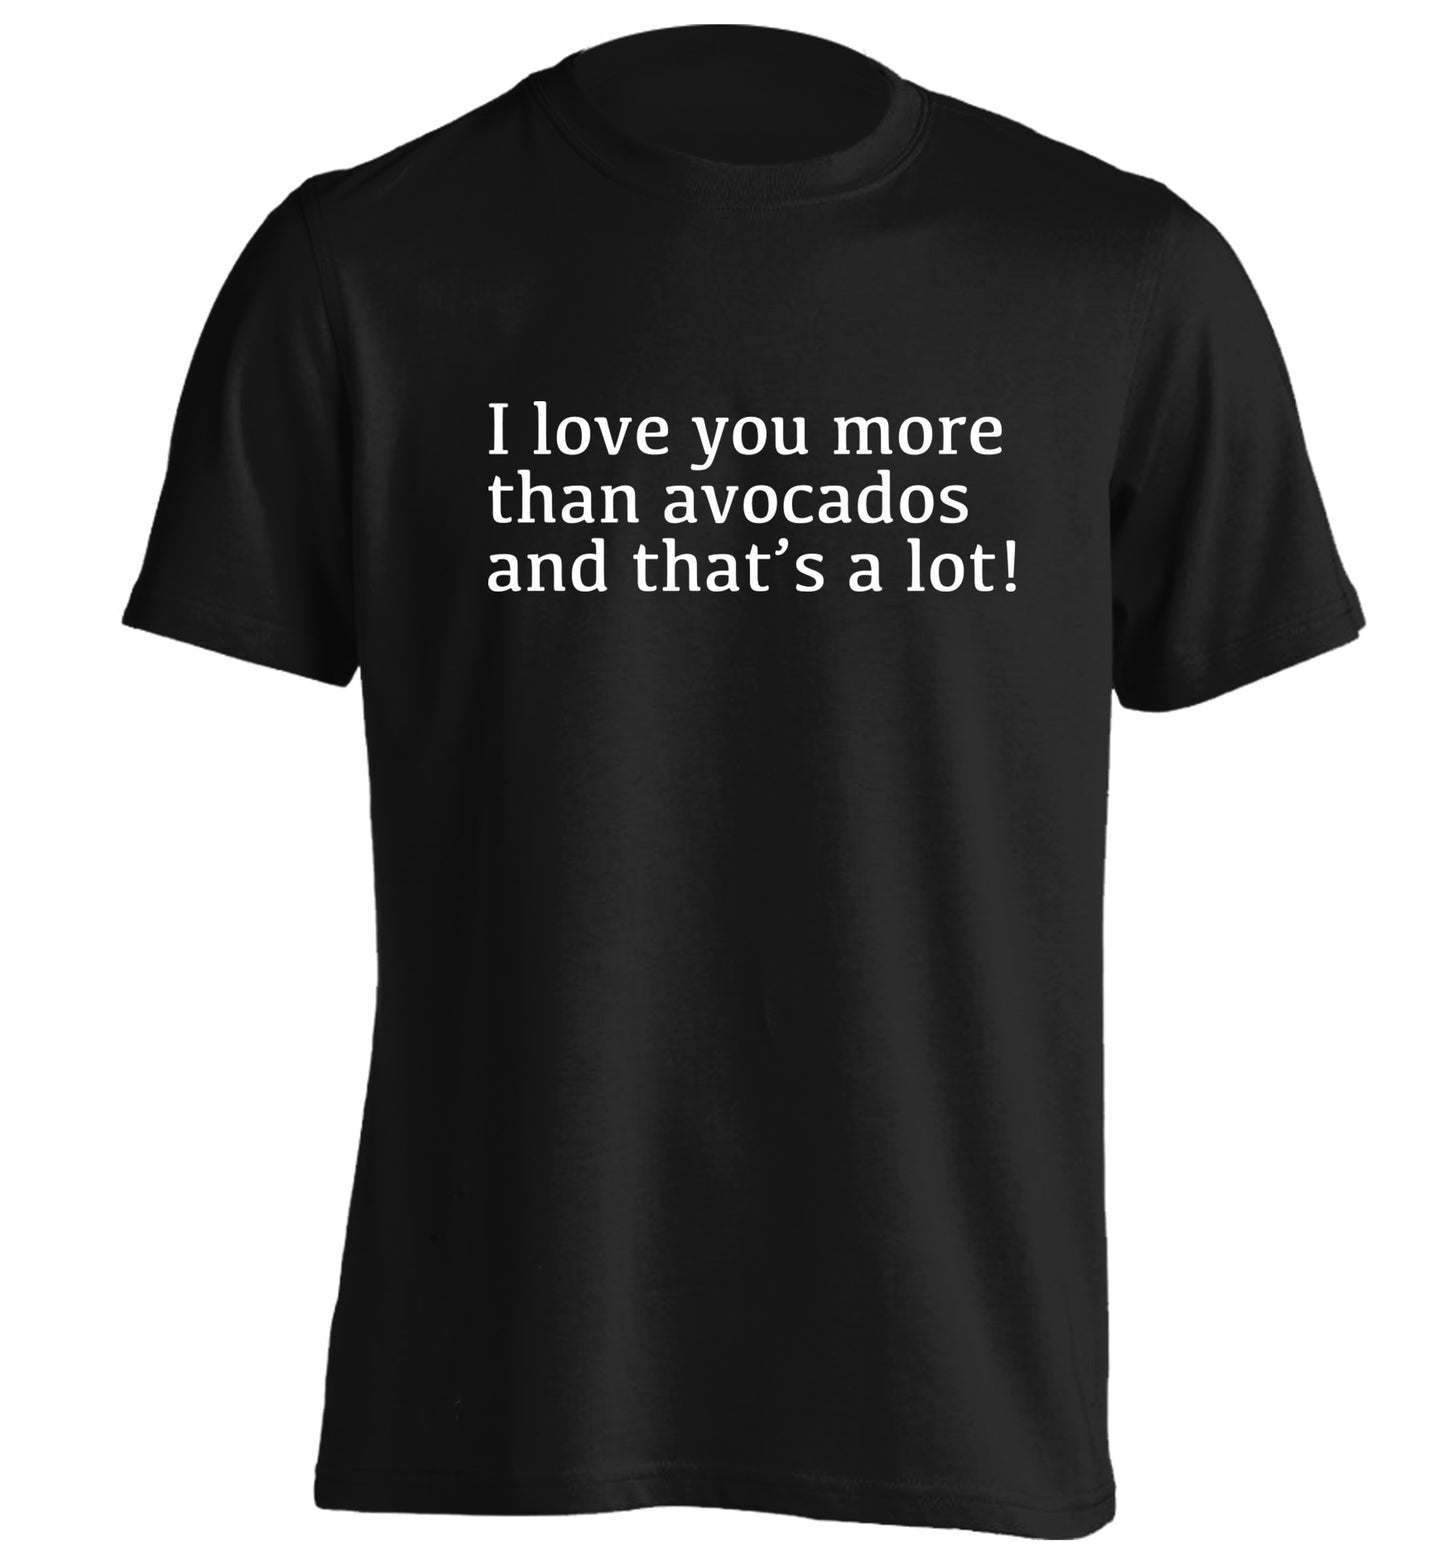 I love you more than avocados and that's a lot adults unisex black Tshirt 2XL